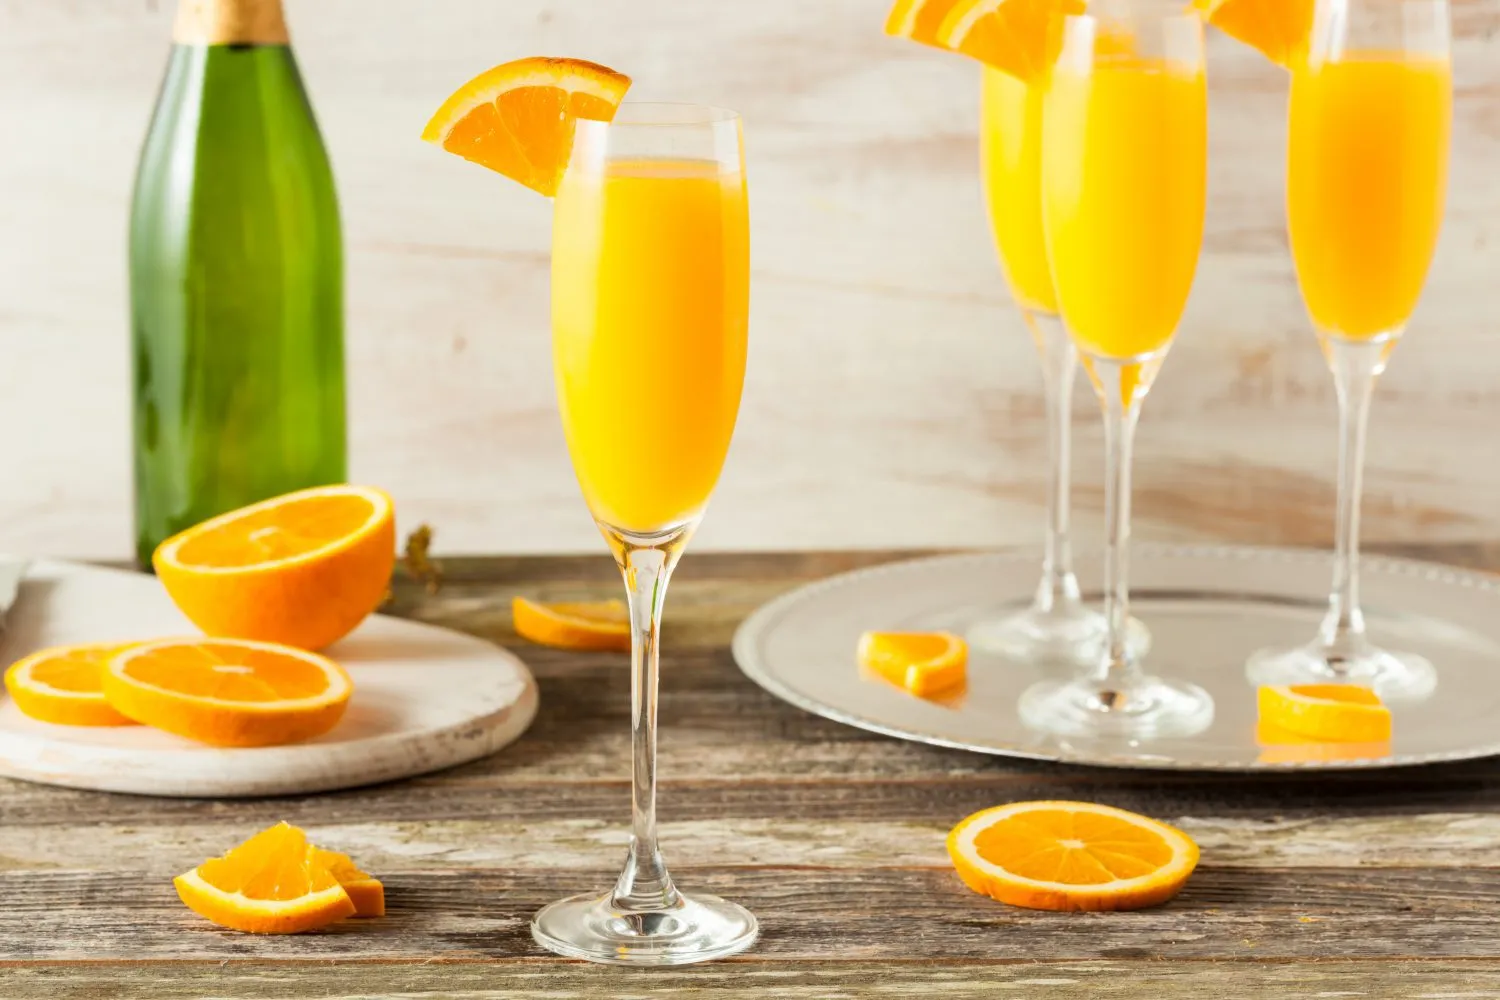 Refreshing mimosa with oranges